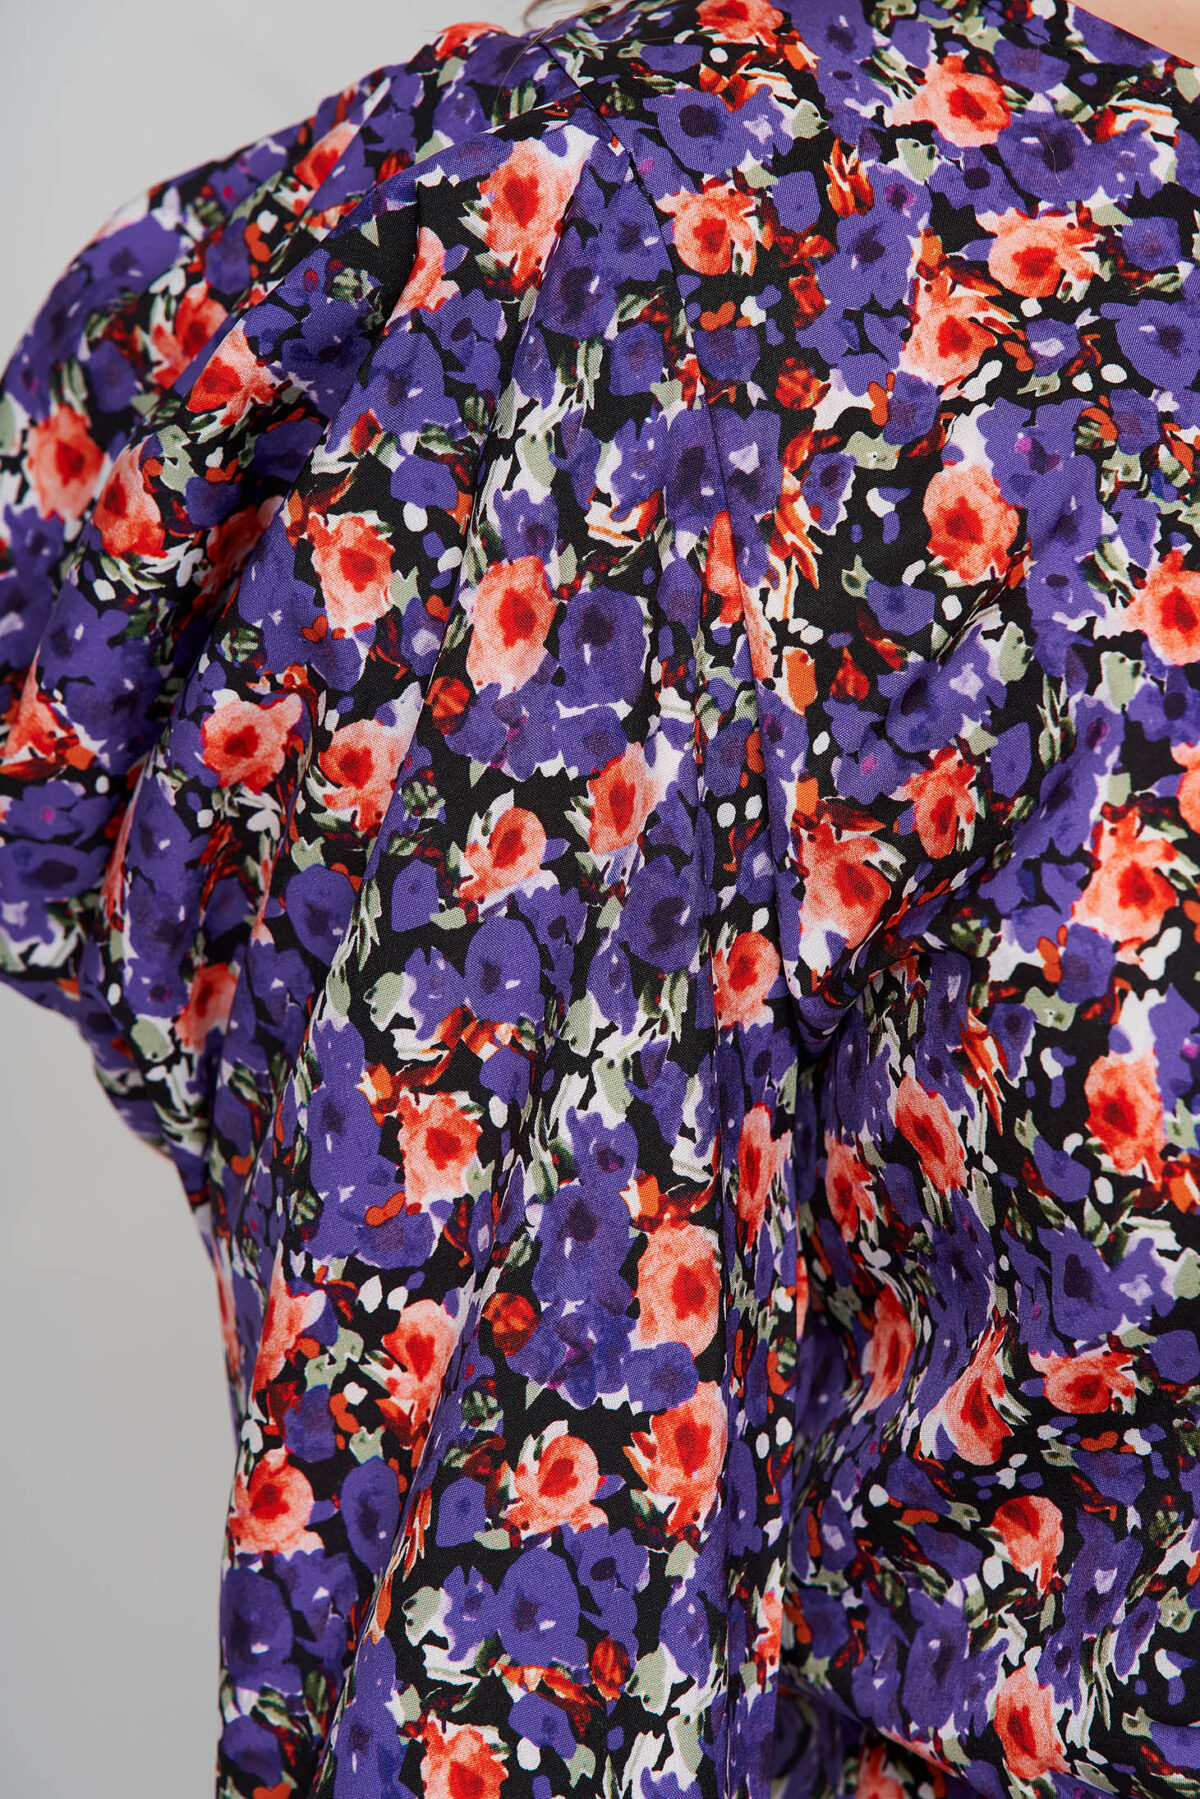 Purple Women`s Blouse With Floral Print Tented From Wrinkled Fabric High Shoulders.